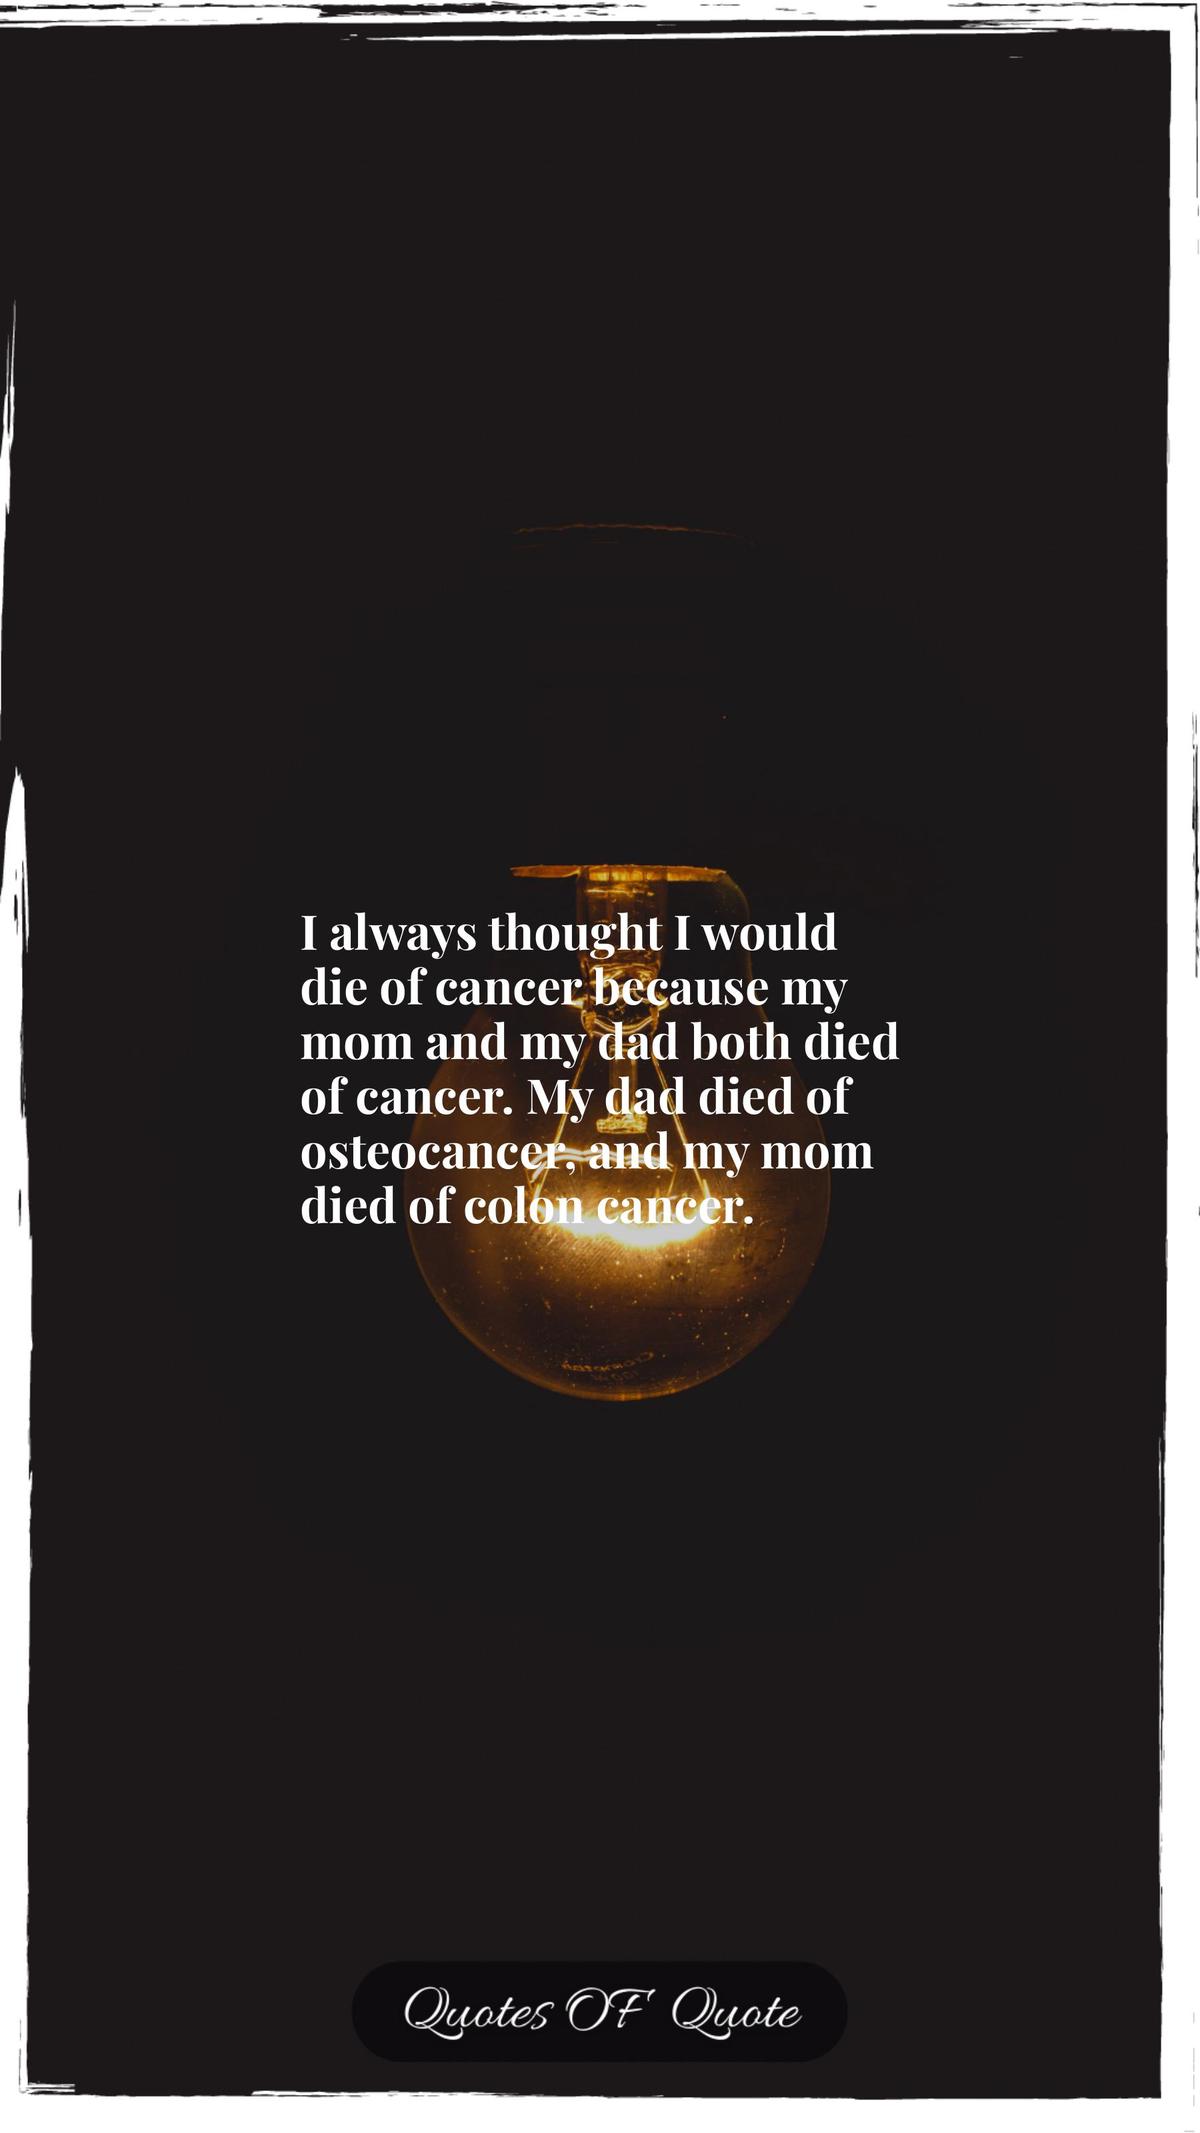 I always thought I would die of cancer because my mom and my dad both died of cancer. My dad died of osteocancer, and my mom died of colon cancer.